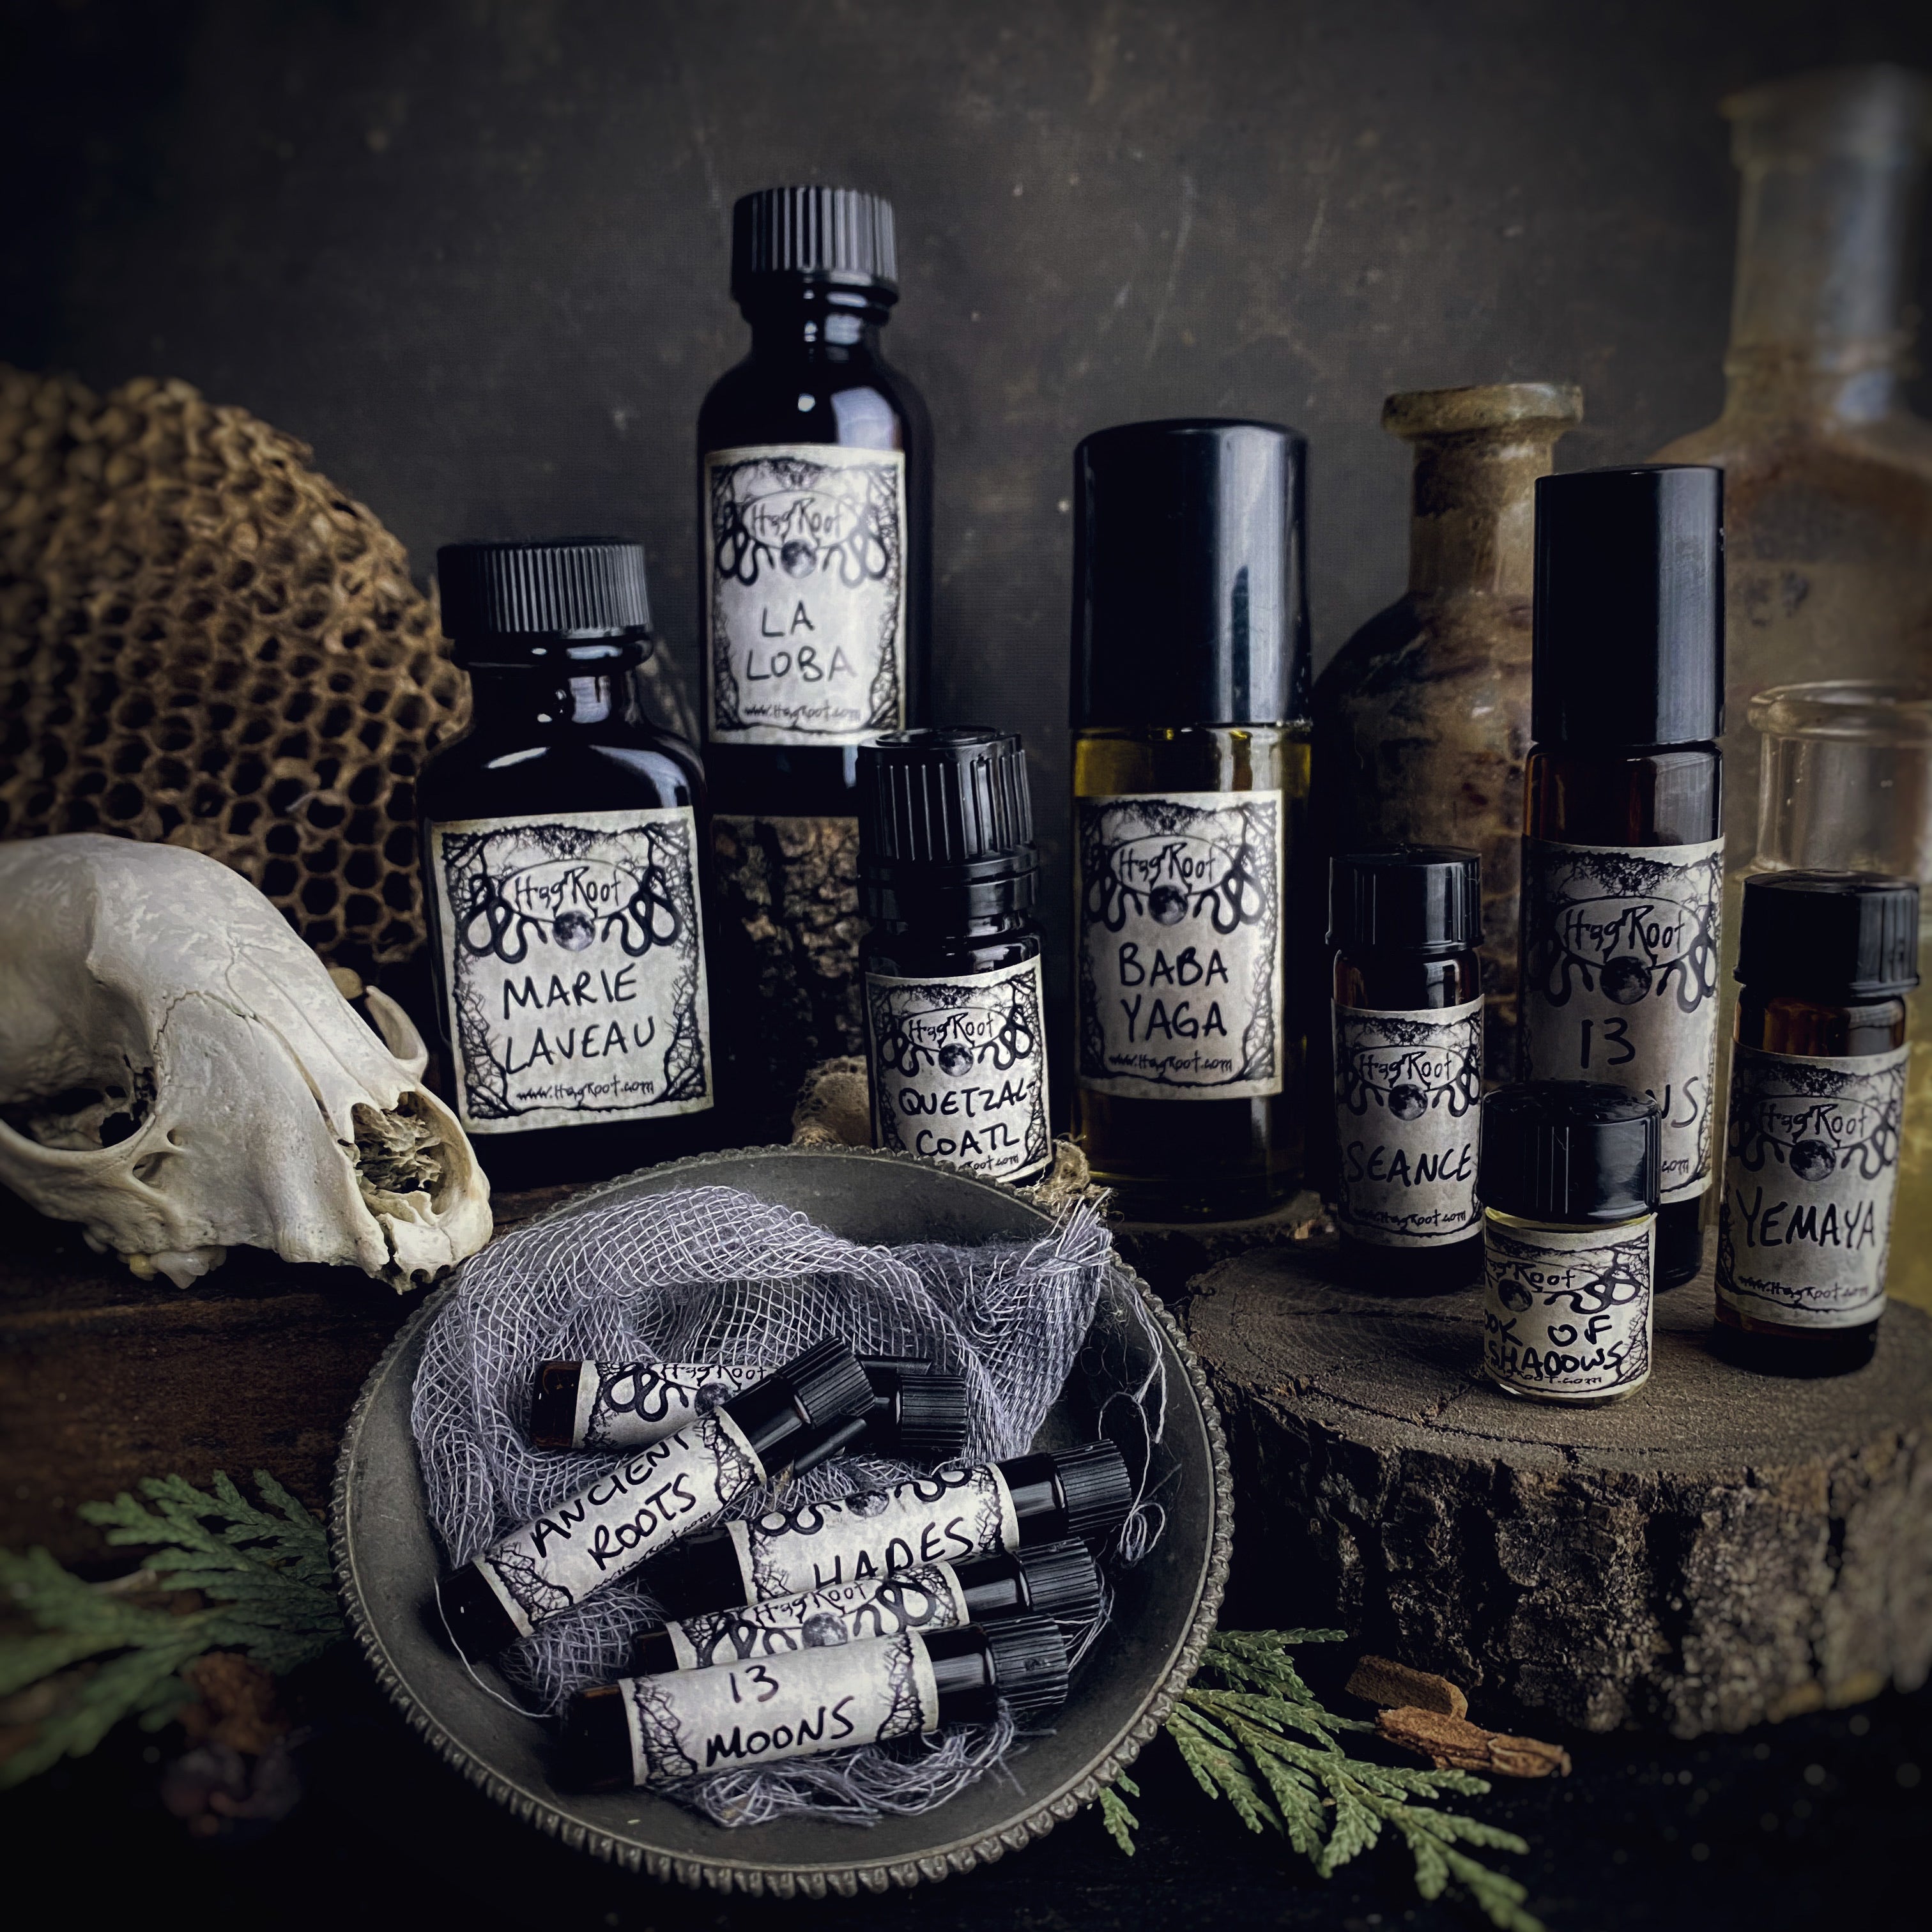 CROW SPIRIT-(Black Tea Leaves, Aged Leather, Black Pine, Charred Wood, Honey, Autumn Spices)-Perfume, Cologne, Anointing, Ritual Oil